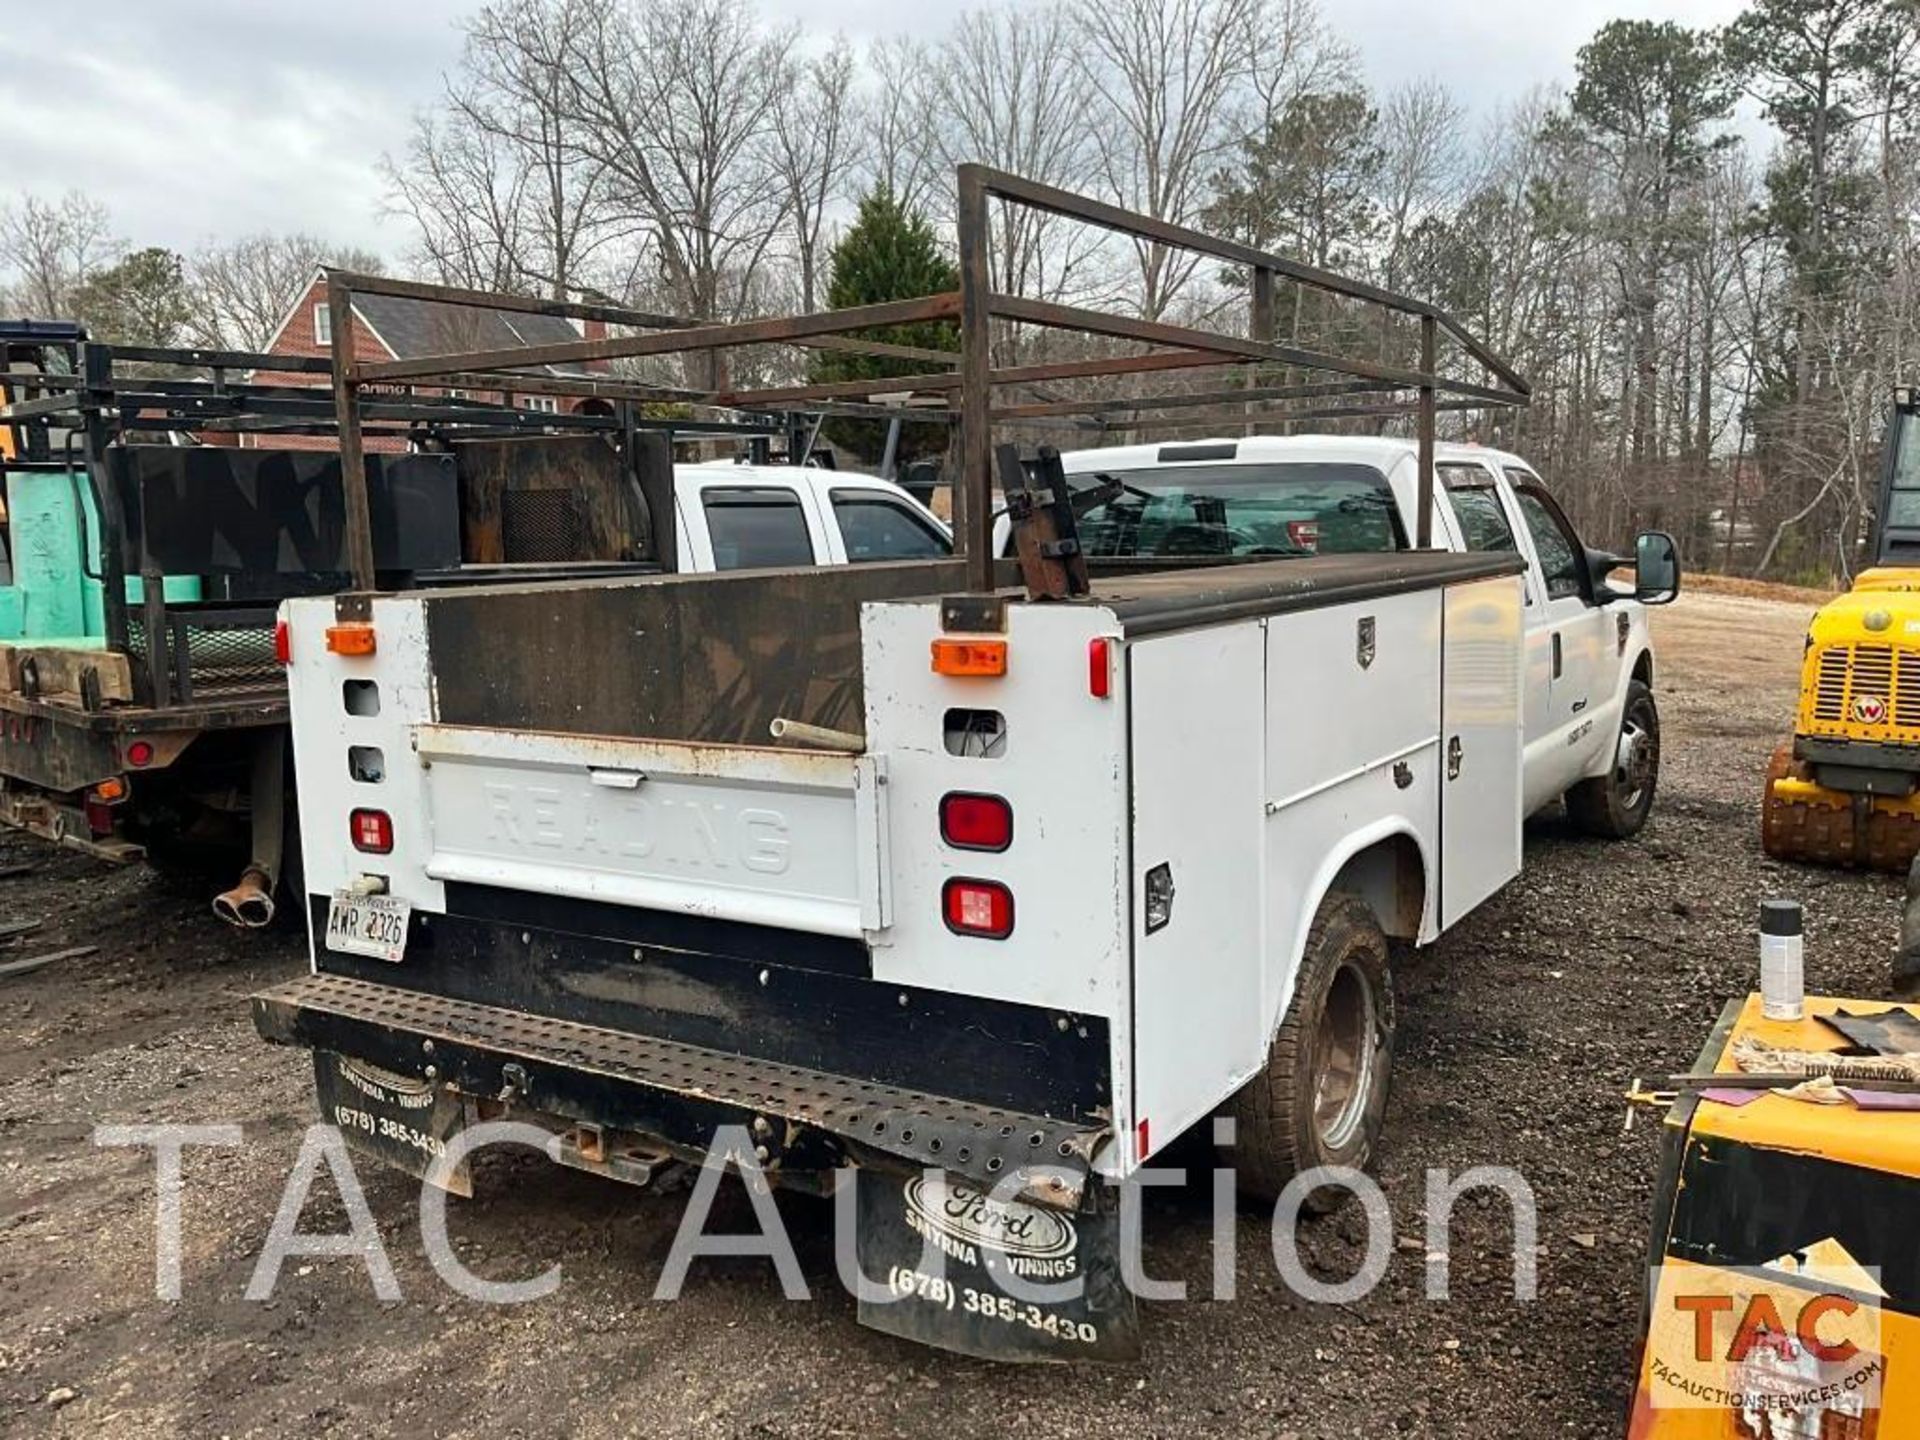 2008 Ford F-350 Super Duty Service Truck - Image 12 of 124